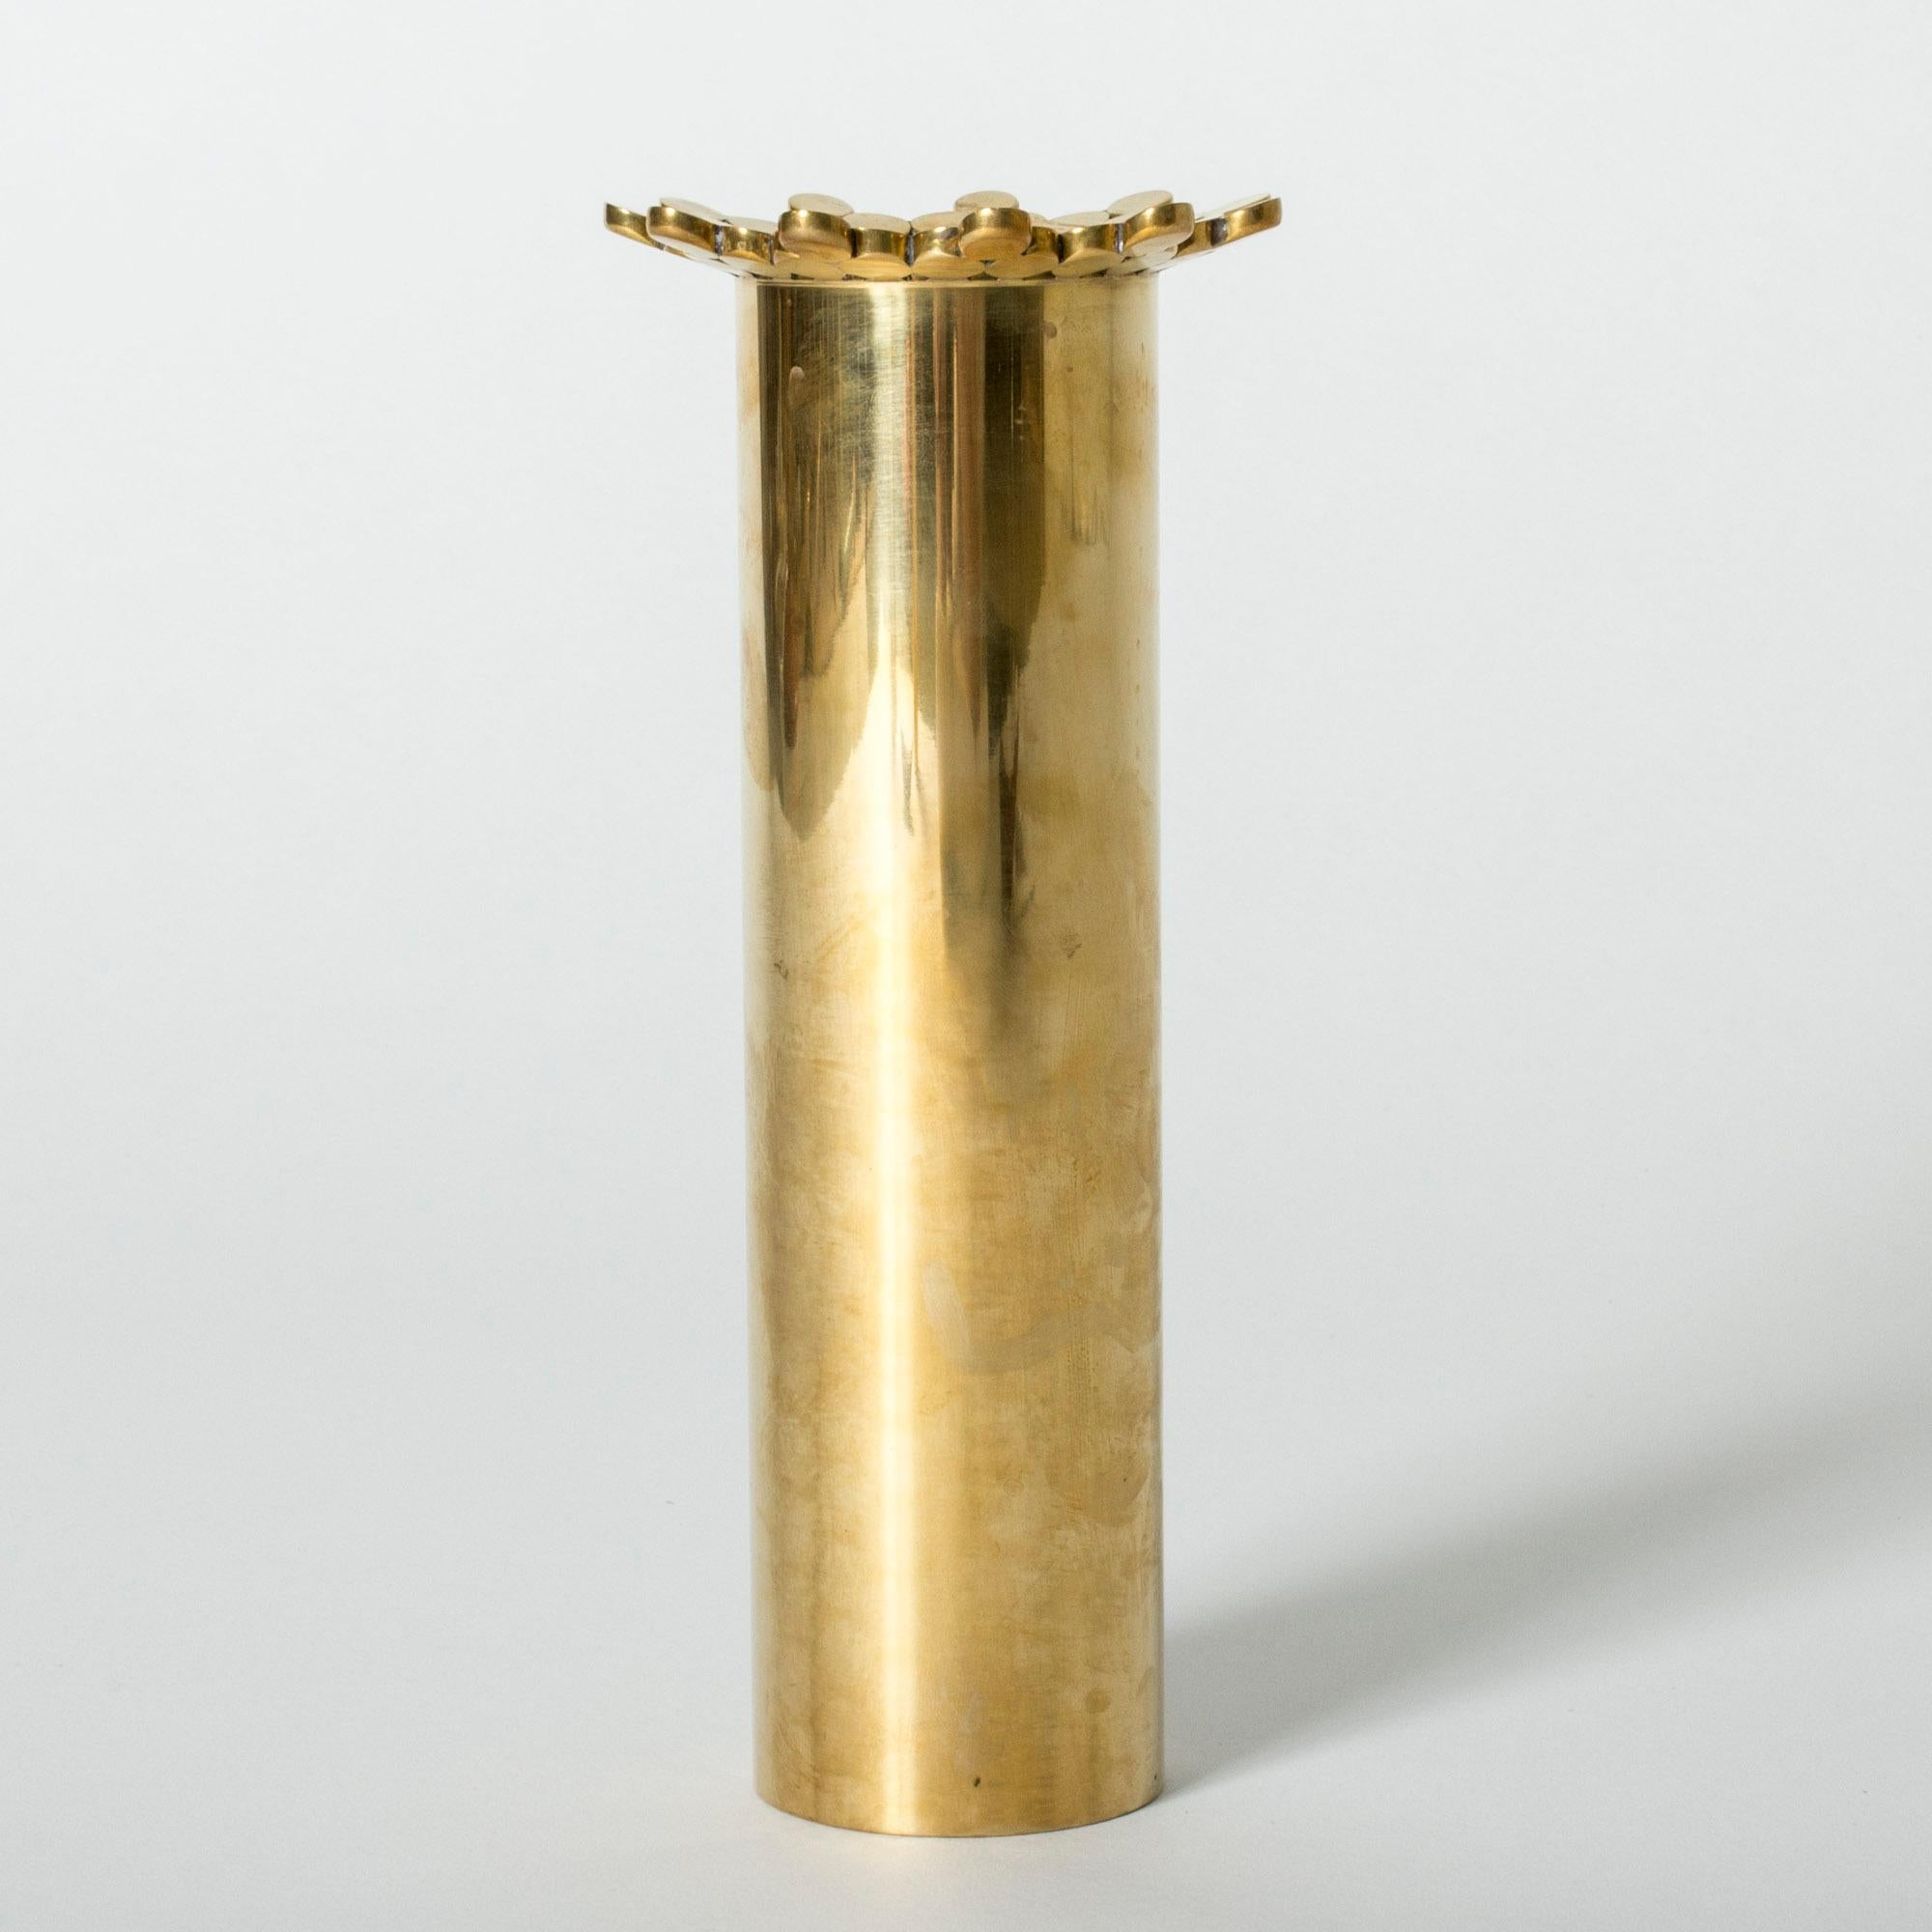 Tall brass vase by Pierre Forssell, with a cool frill of spheres around the rim.